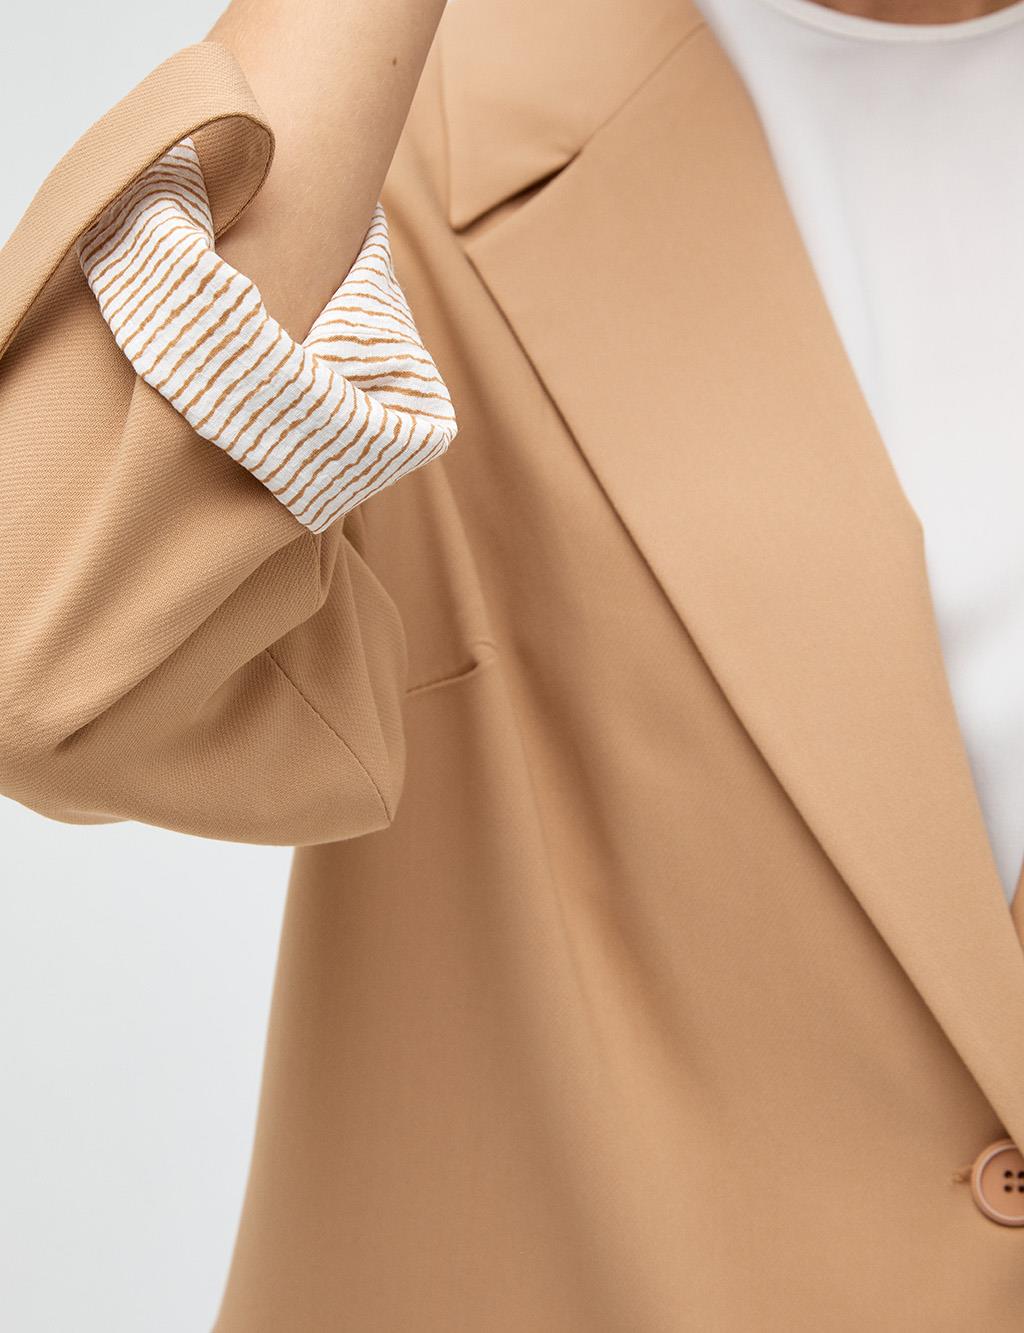 Blazer with Foldable Sleeves Beige